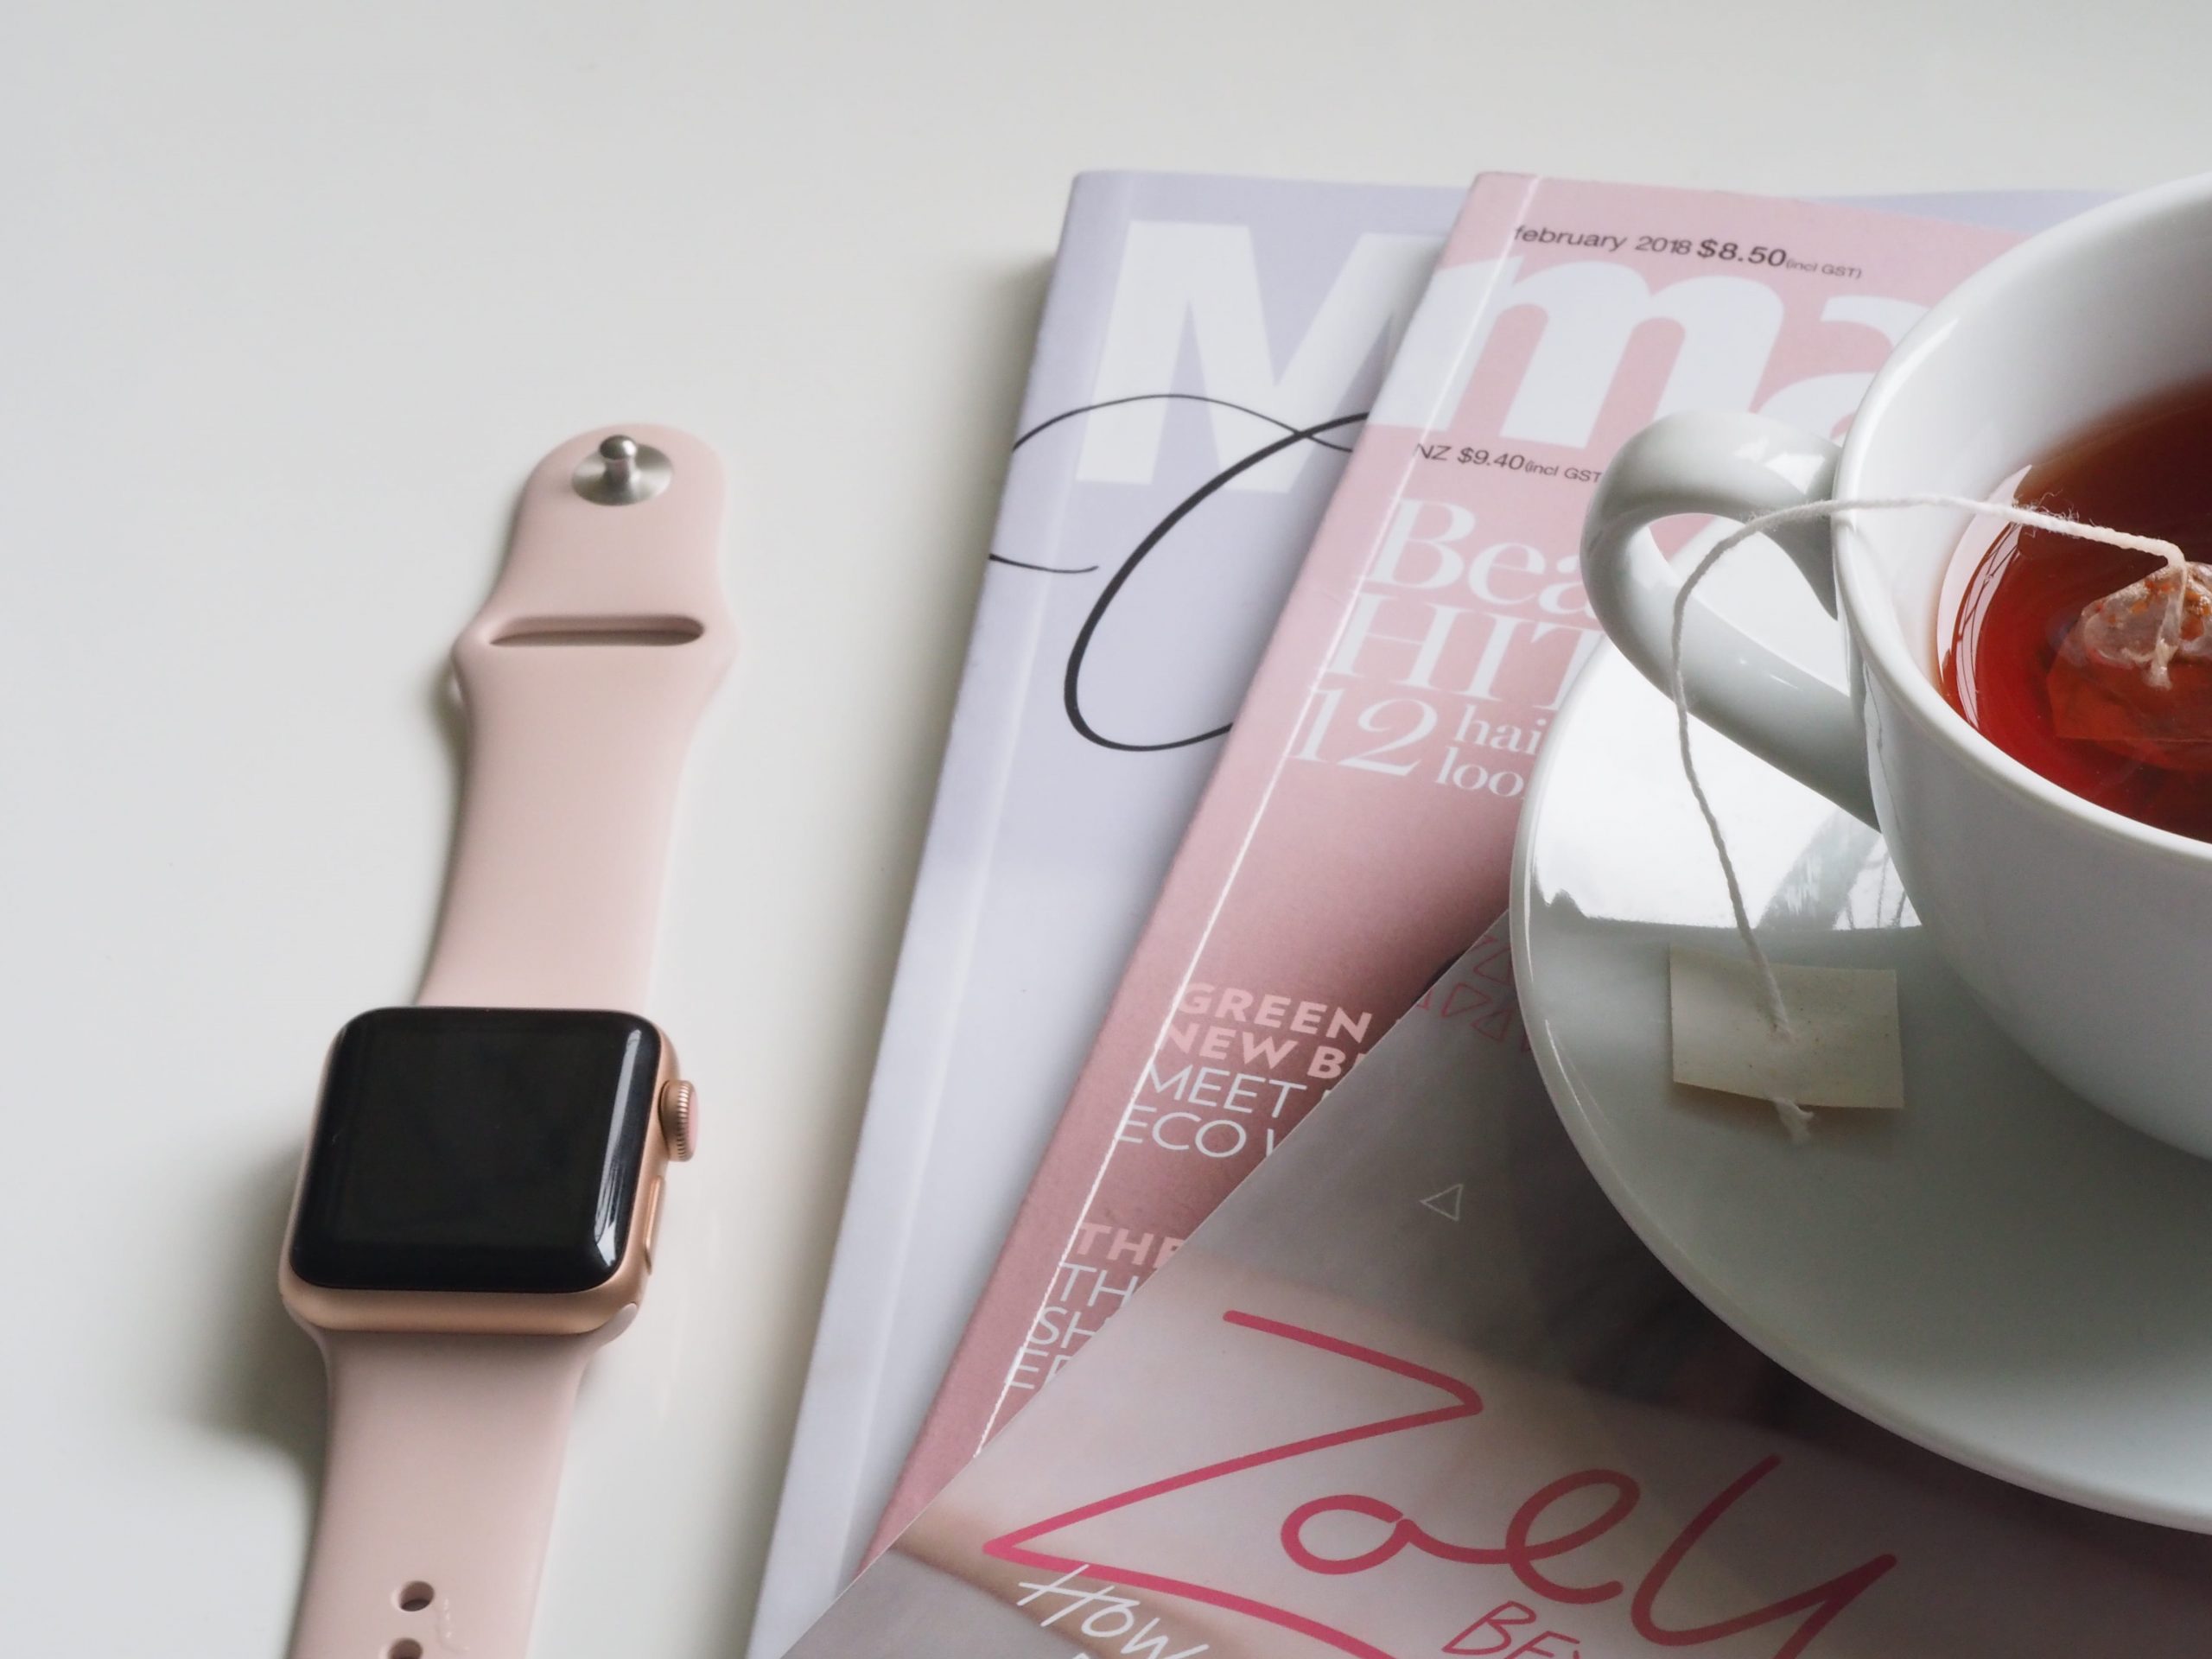 rose gold aluminum case Apple Watch with pink Sport Band beside white ceramic teacup filled with red liquid placed on white wooden board